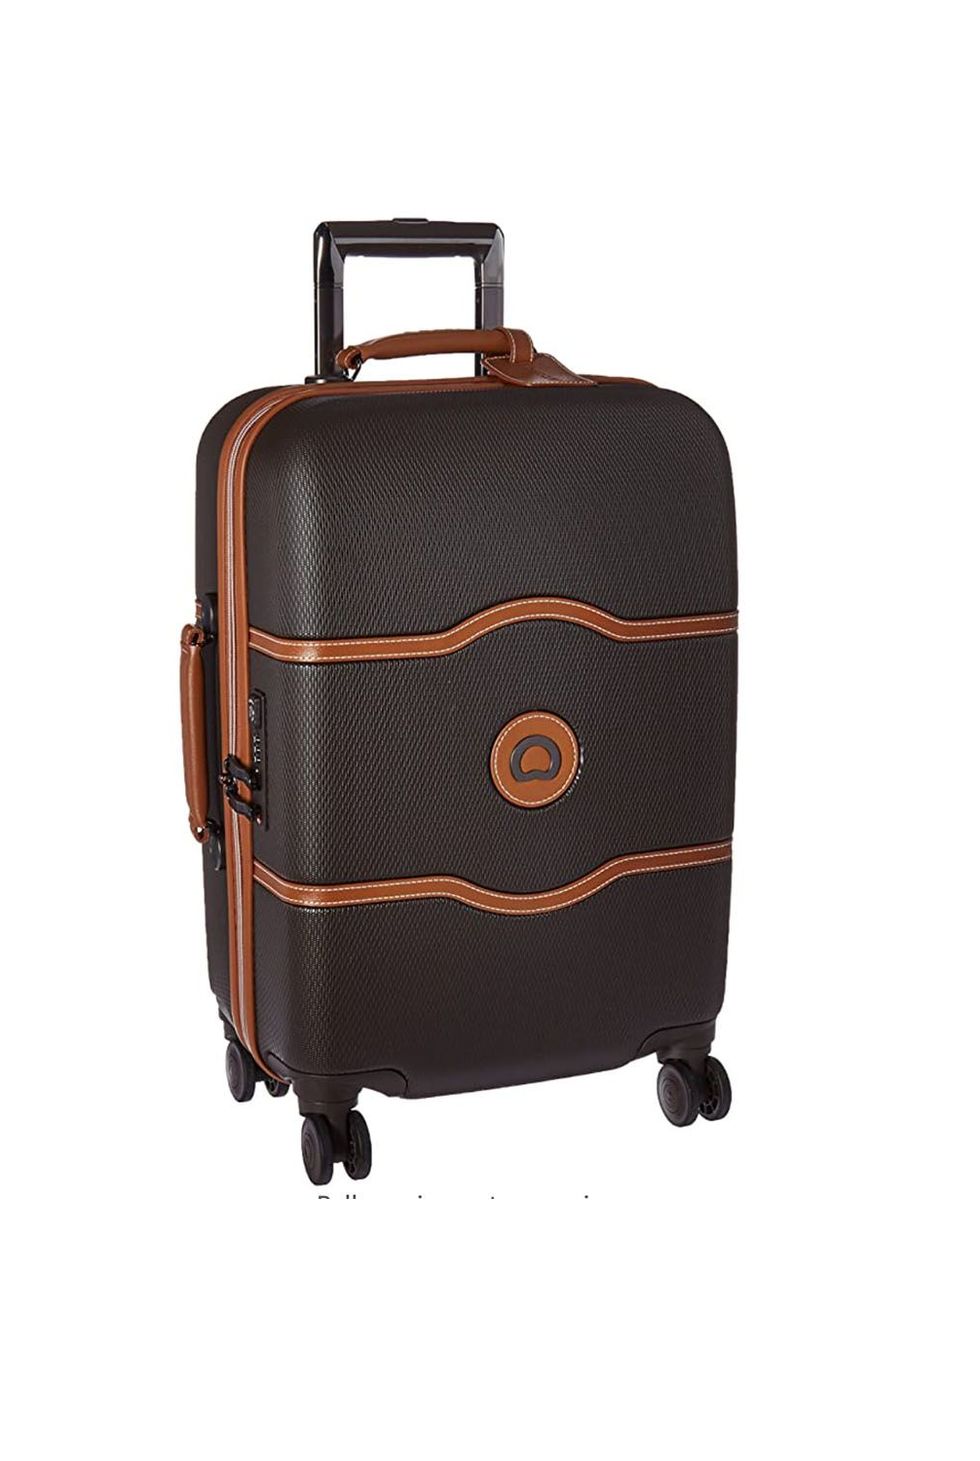 Amazon Prime's Best Luggage and Suitcase Deals of Early Access